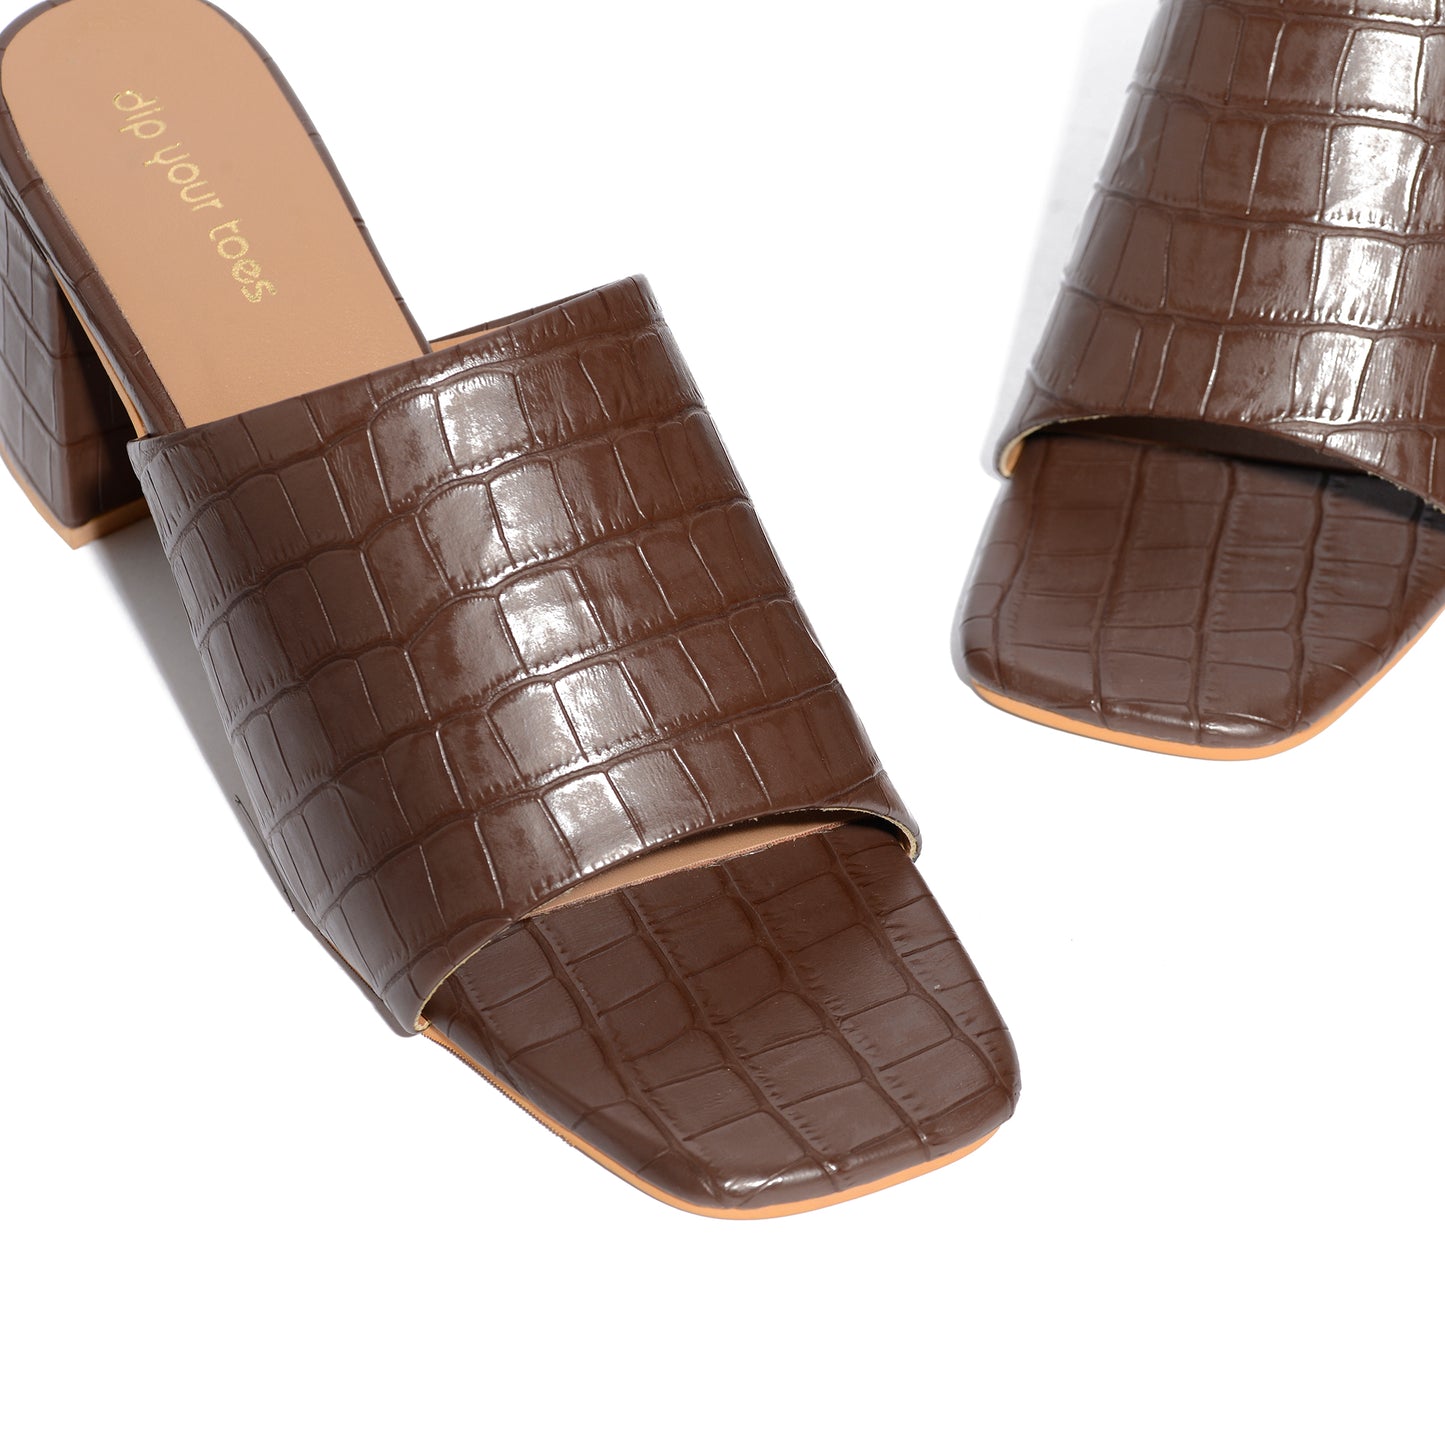 Muted Brown Sandals